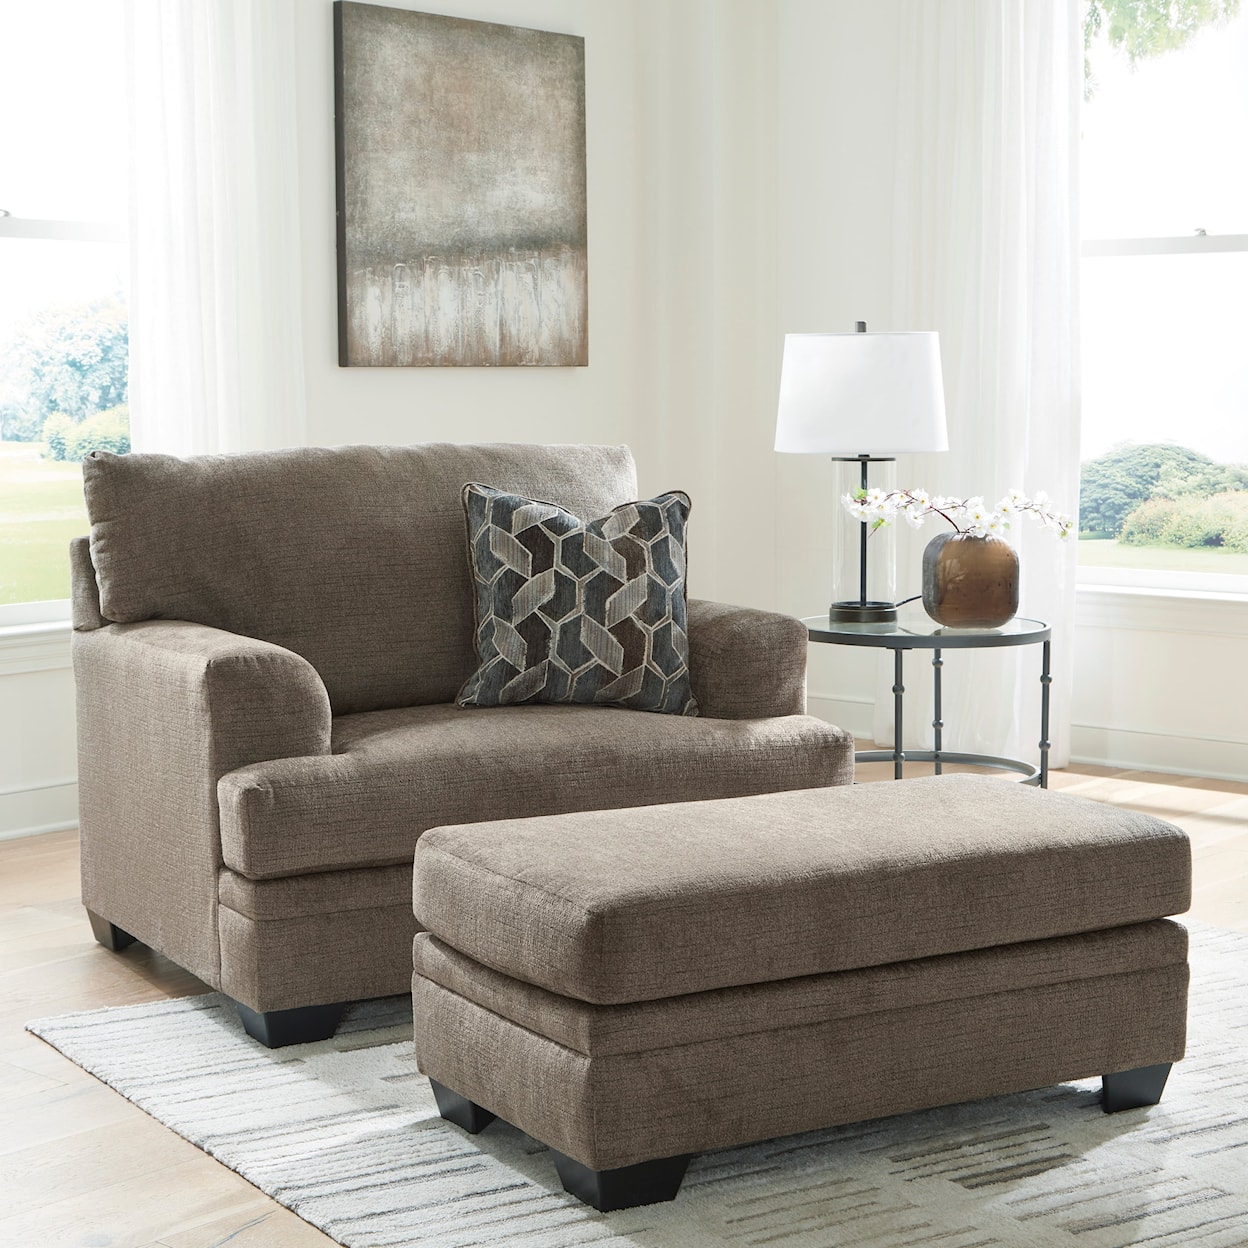 StyleLine Stonemeade Oversized Chair and Ottoman